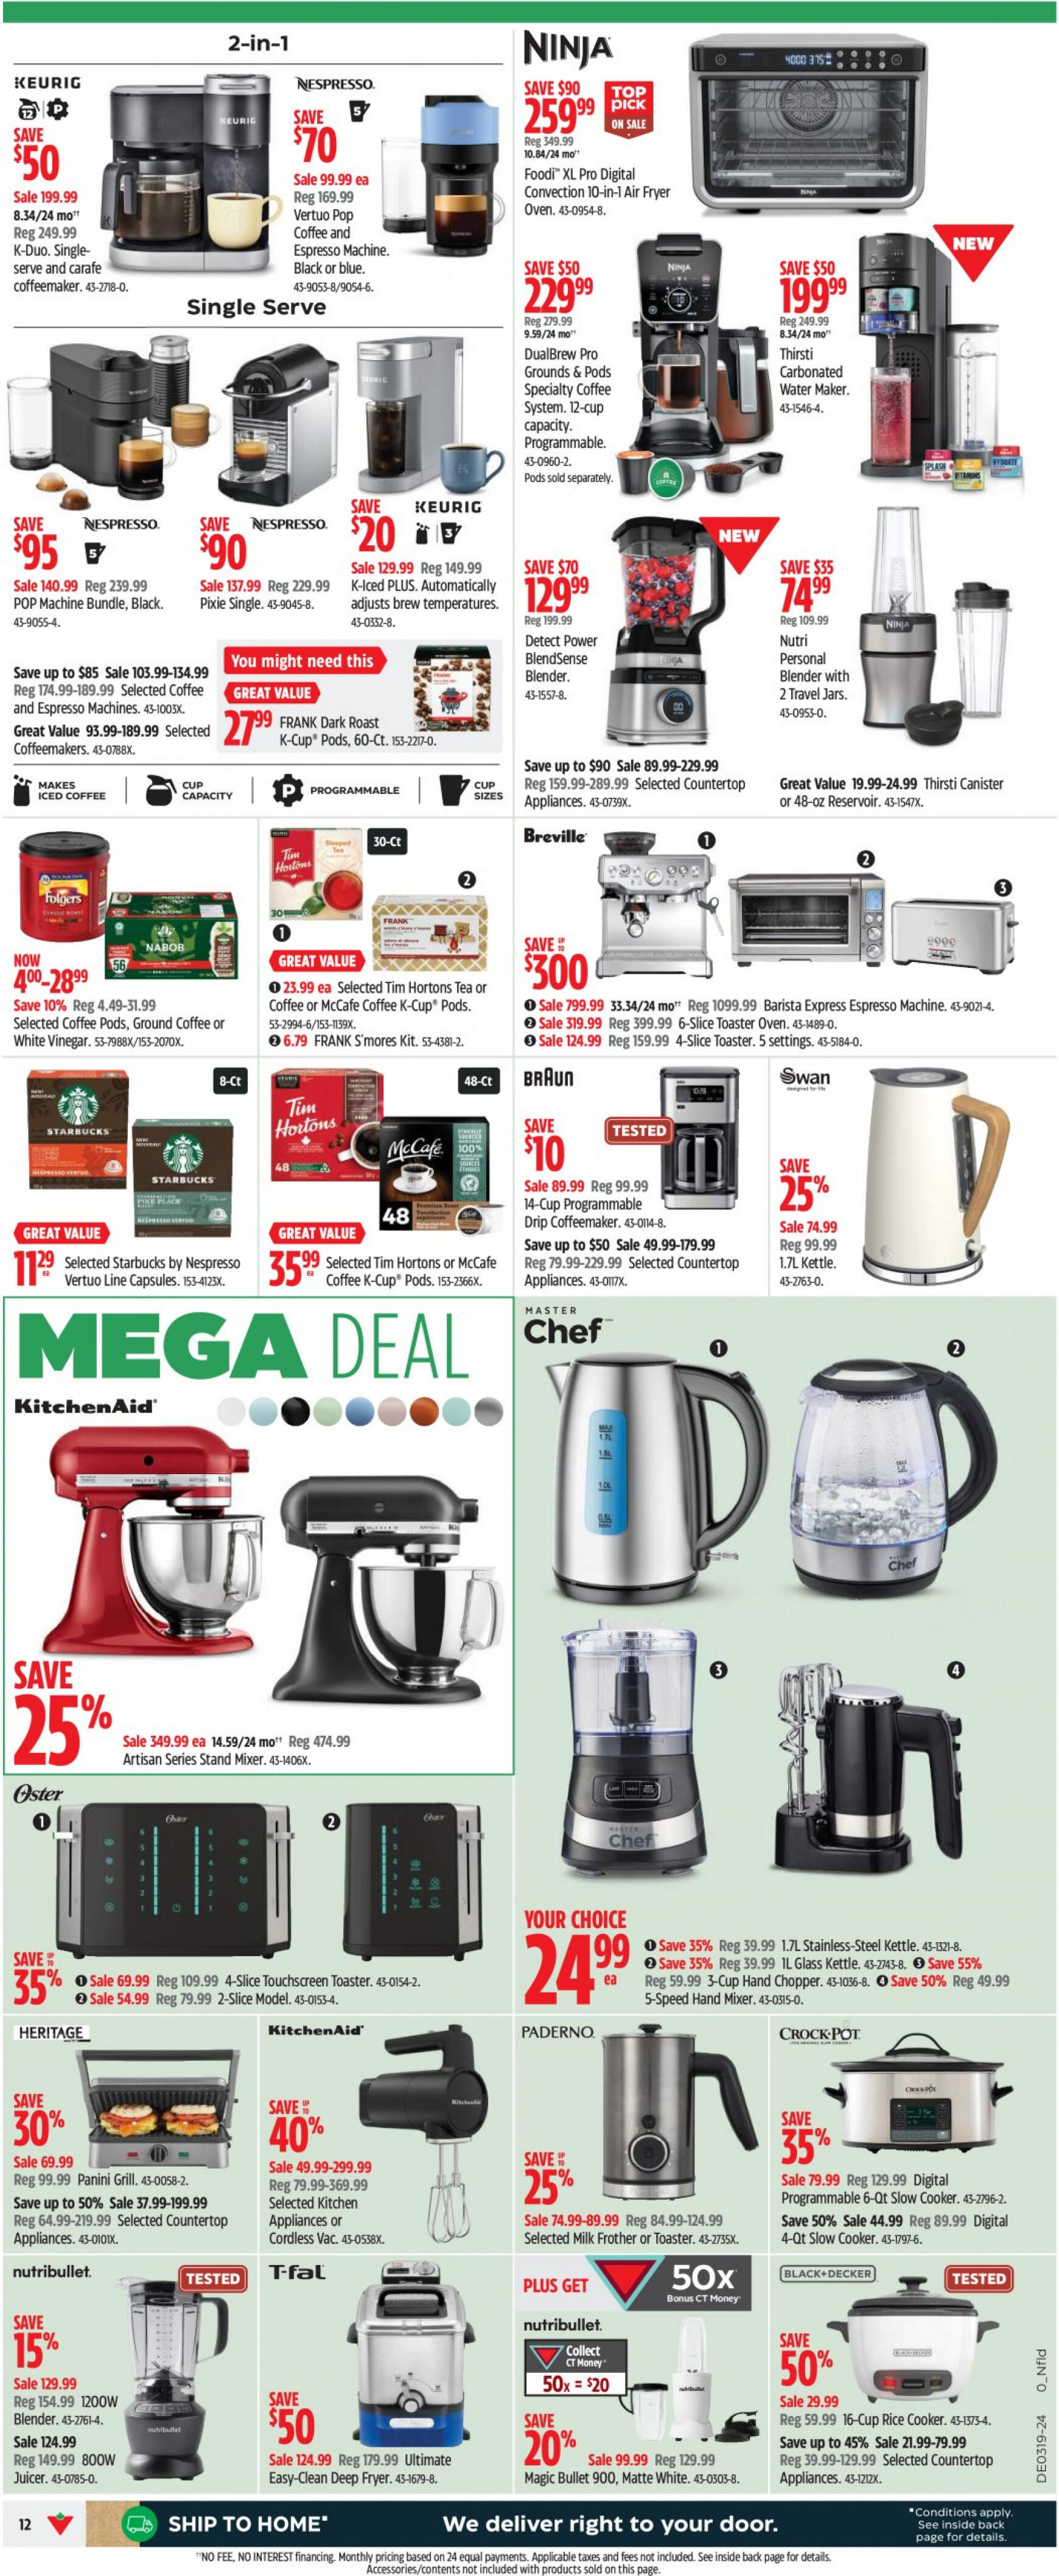 canadian-tire - Canadian Tire flyer current 02.05. - 08.05. - page: 11